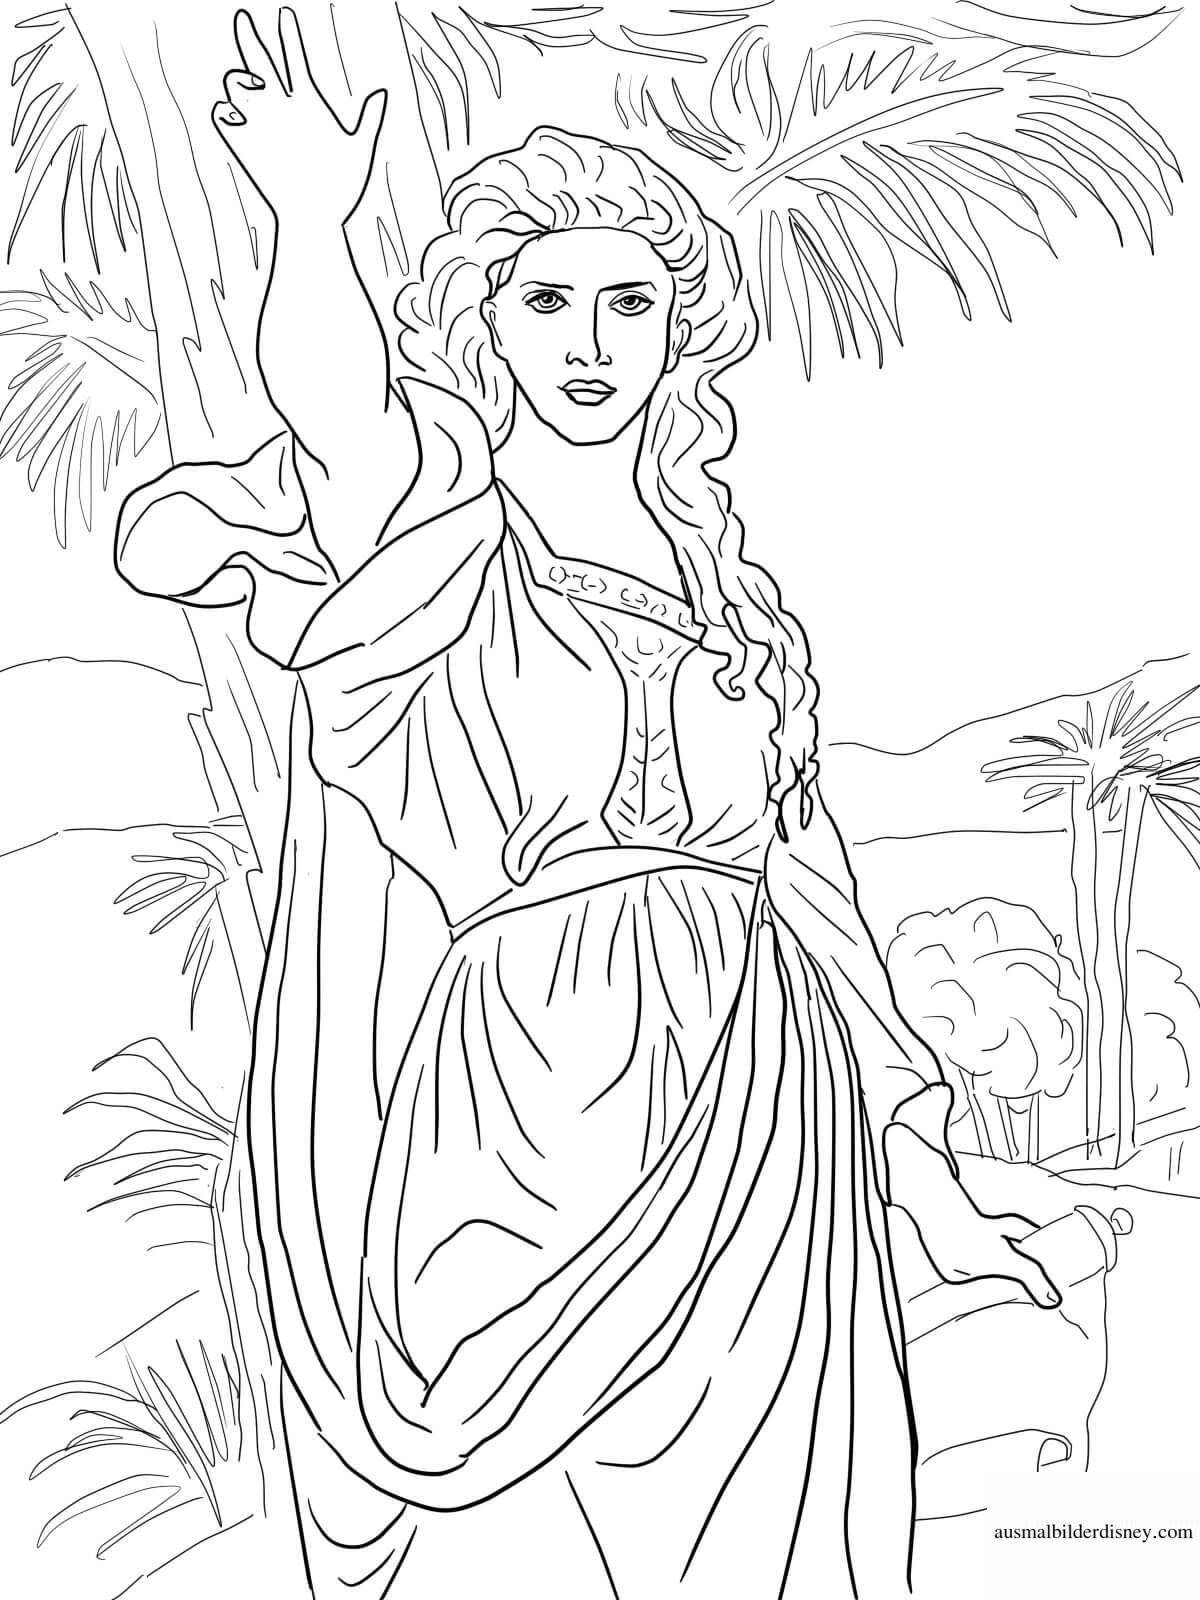 Majestic coloring of the goddess Hera